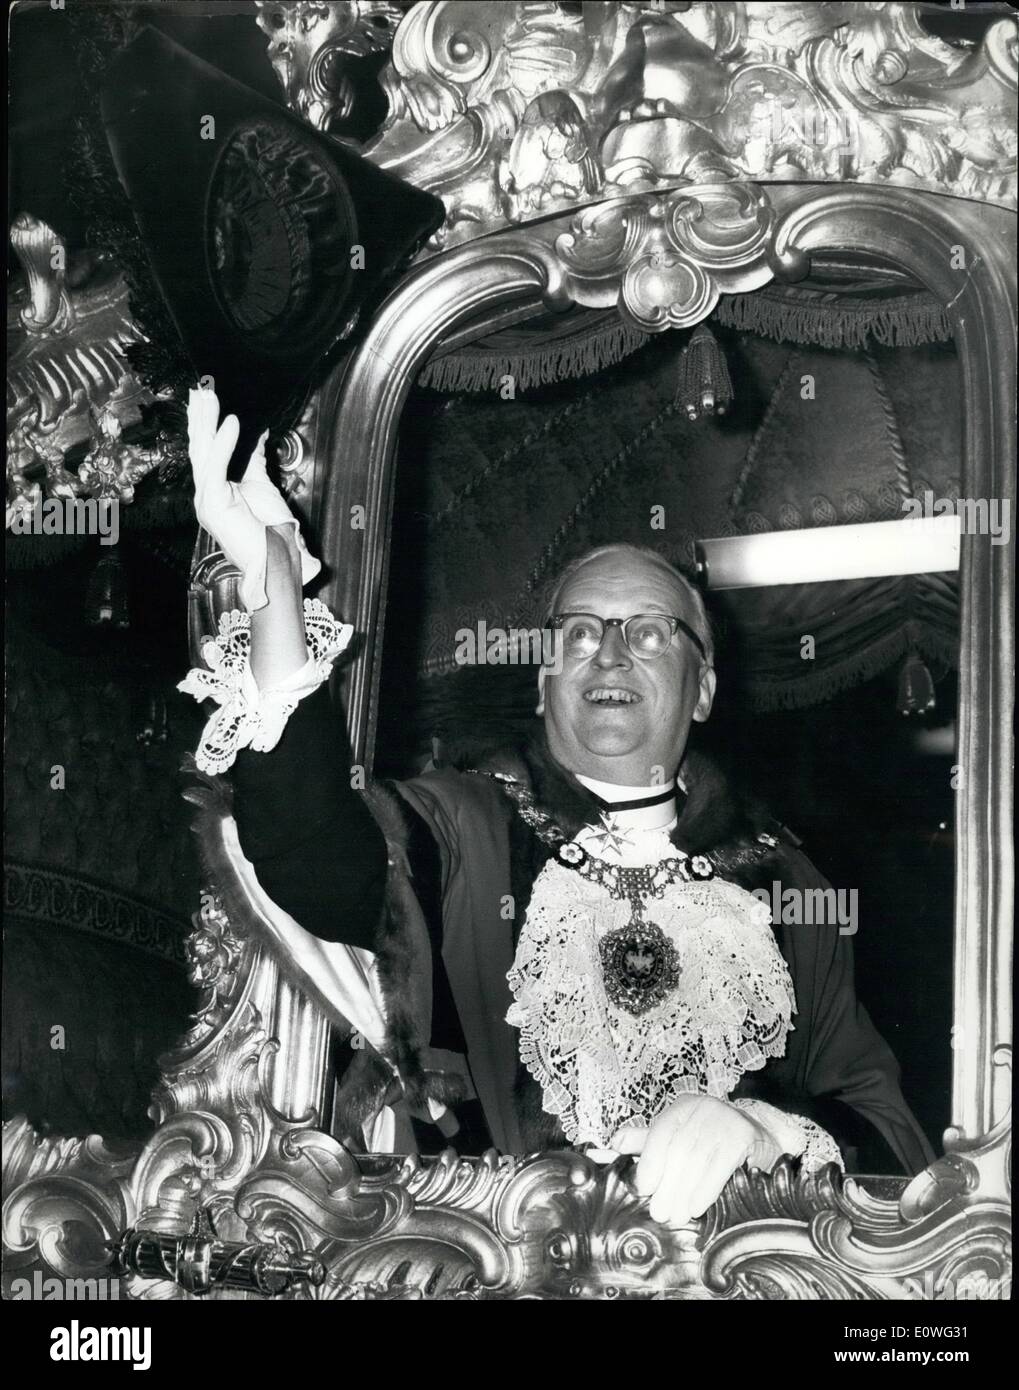 Nov. 11, 1962 - Lord Mayor's Procession: The Lord Mayor's Procession went through London Today, First stage of he journey for the new Lord Maror, Sir Ralph Perring, was from the Guildhall to the Mansion House in the Lord Mayor's Coach. Photo Shows Sir Ralph Perring in the coach at the start of today's Procession. Stock Photo